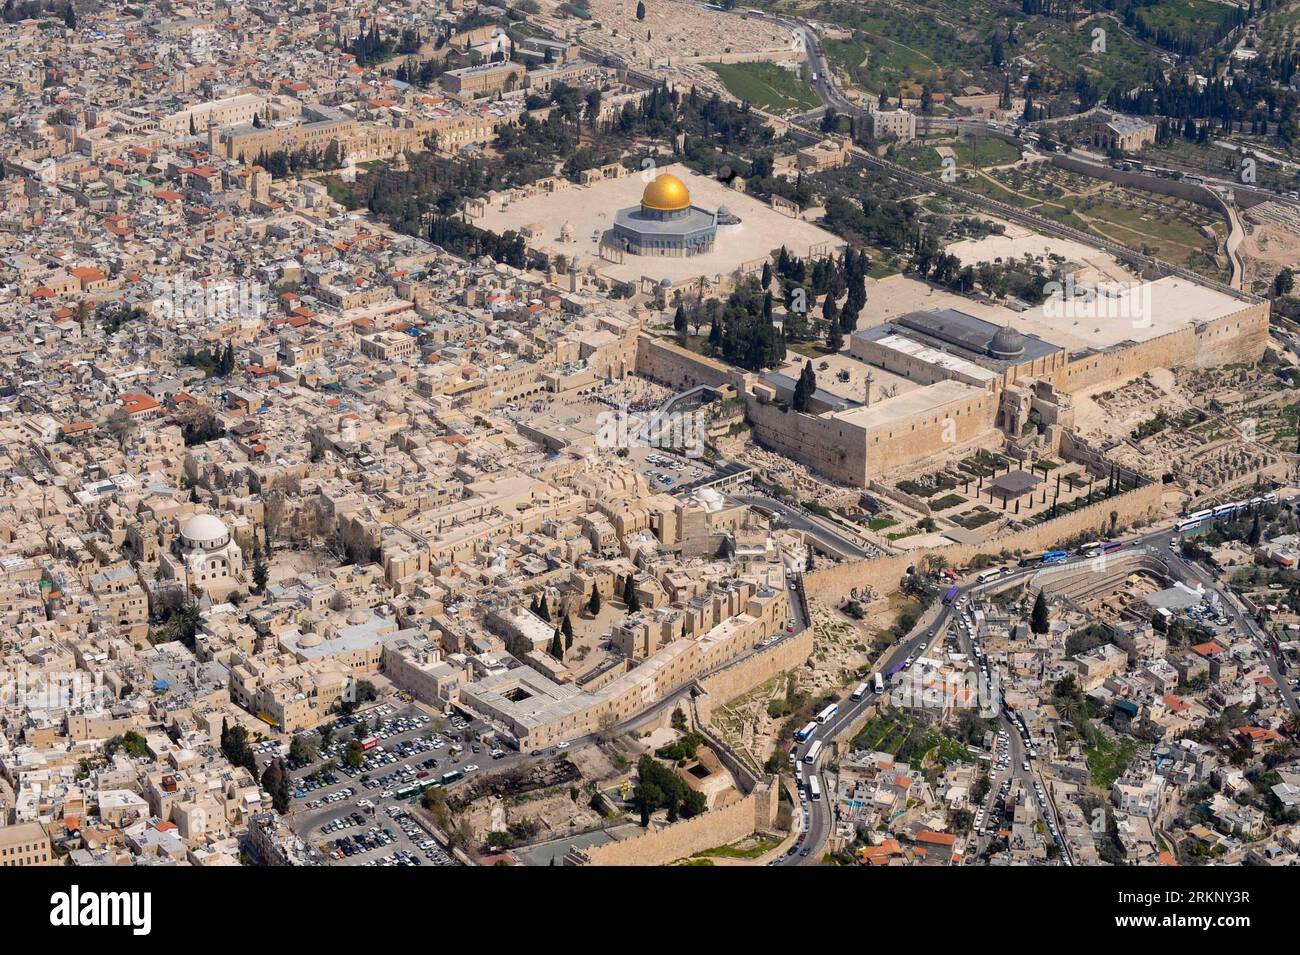 Bildnummer: 57690411  Datum: 27.03.2012  Copyright: imago/Xinhua (120326)-- JERUSALEM, March 26, 2012 (Xinhua) -- Photo taken on March 26, 2012 shows the bird s-eye view of the old city of Jerusalem. Jerusalem is located in the Judean Mountains between the Mediterranean Sea and the northern edge of the Dead Sea. It is a holy city to the three major religions -- Judaism, Christianity and Islam. Today, the status of Jerusalem remains on the core issues in the Israeli-Palestinian conflict. (Xinhua/Yin Dongxun) MIDEAST-JERUSALEM-AERIAL VIEW PUBLICATIONxNOTxINxCHN Gesellschaft Luftaufnahme Totale L Stock Photo